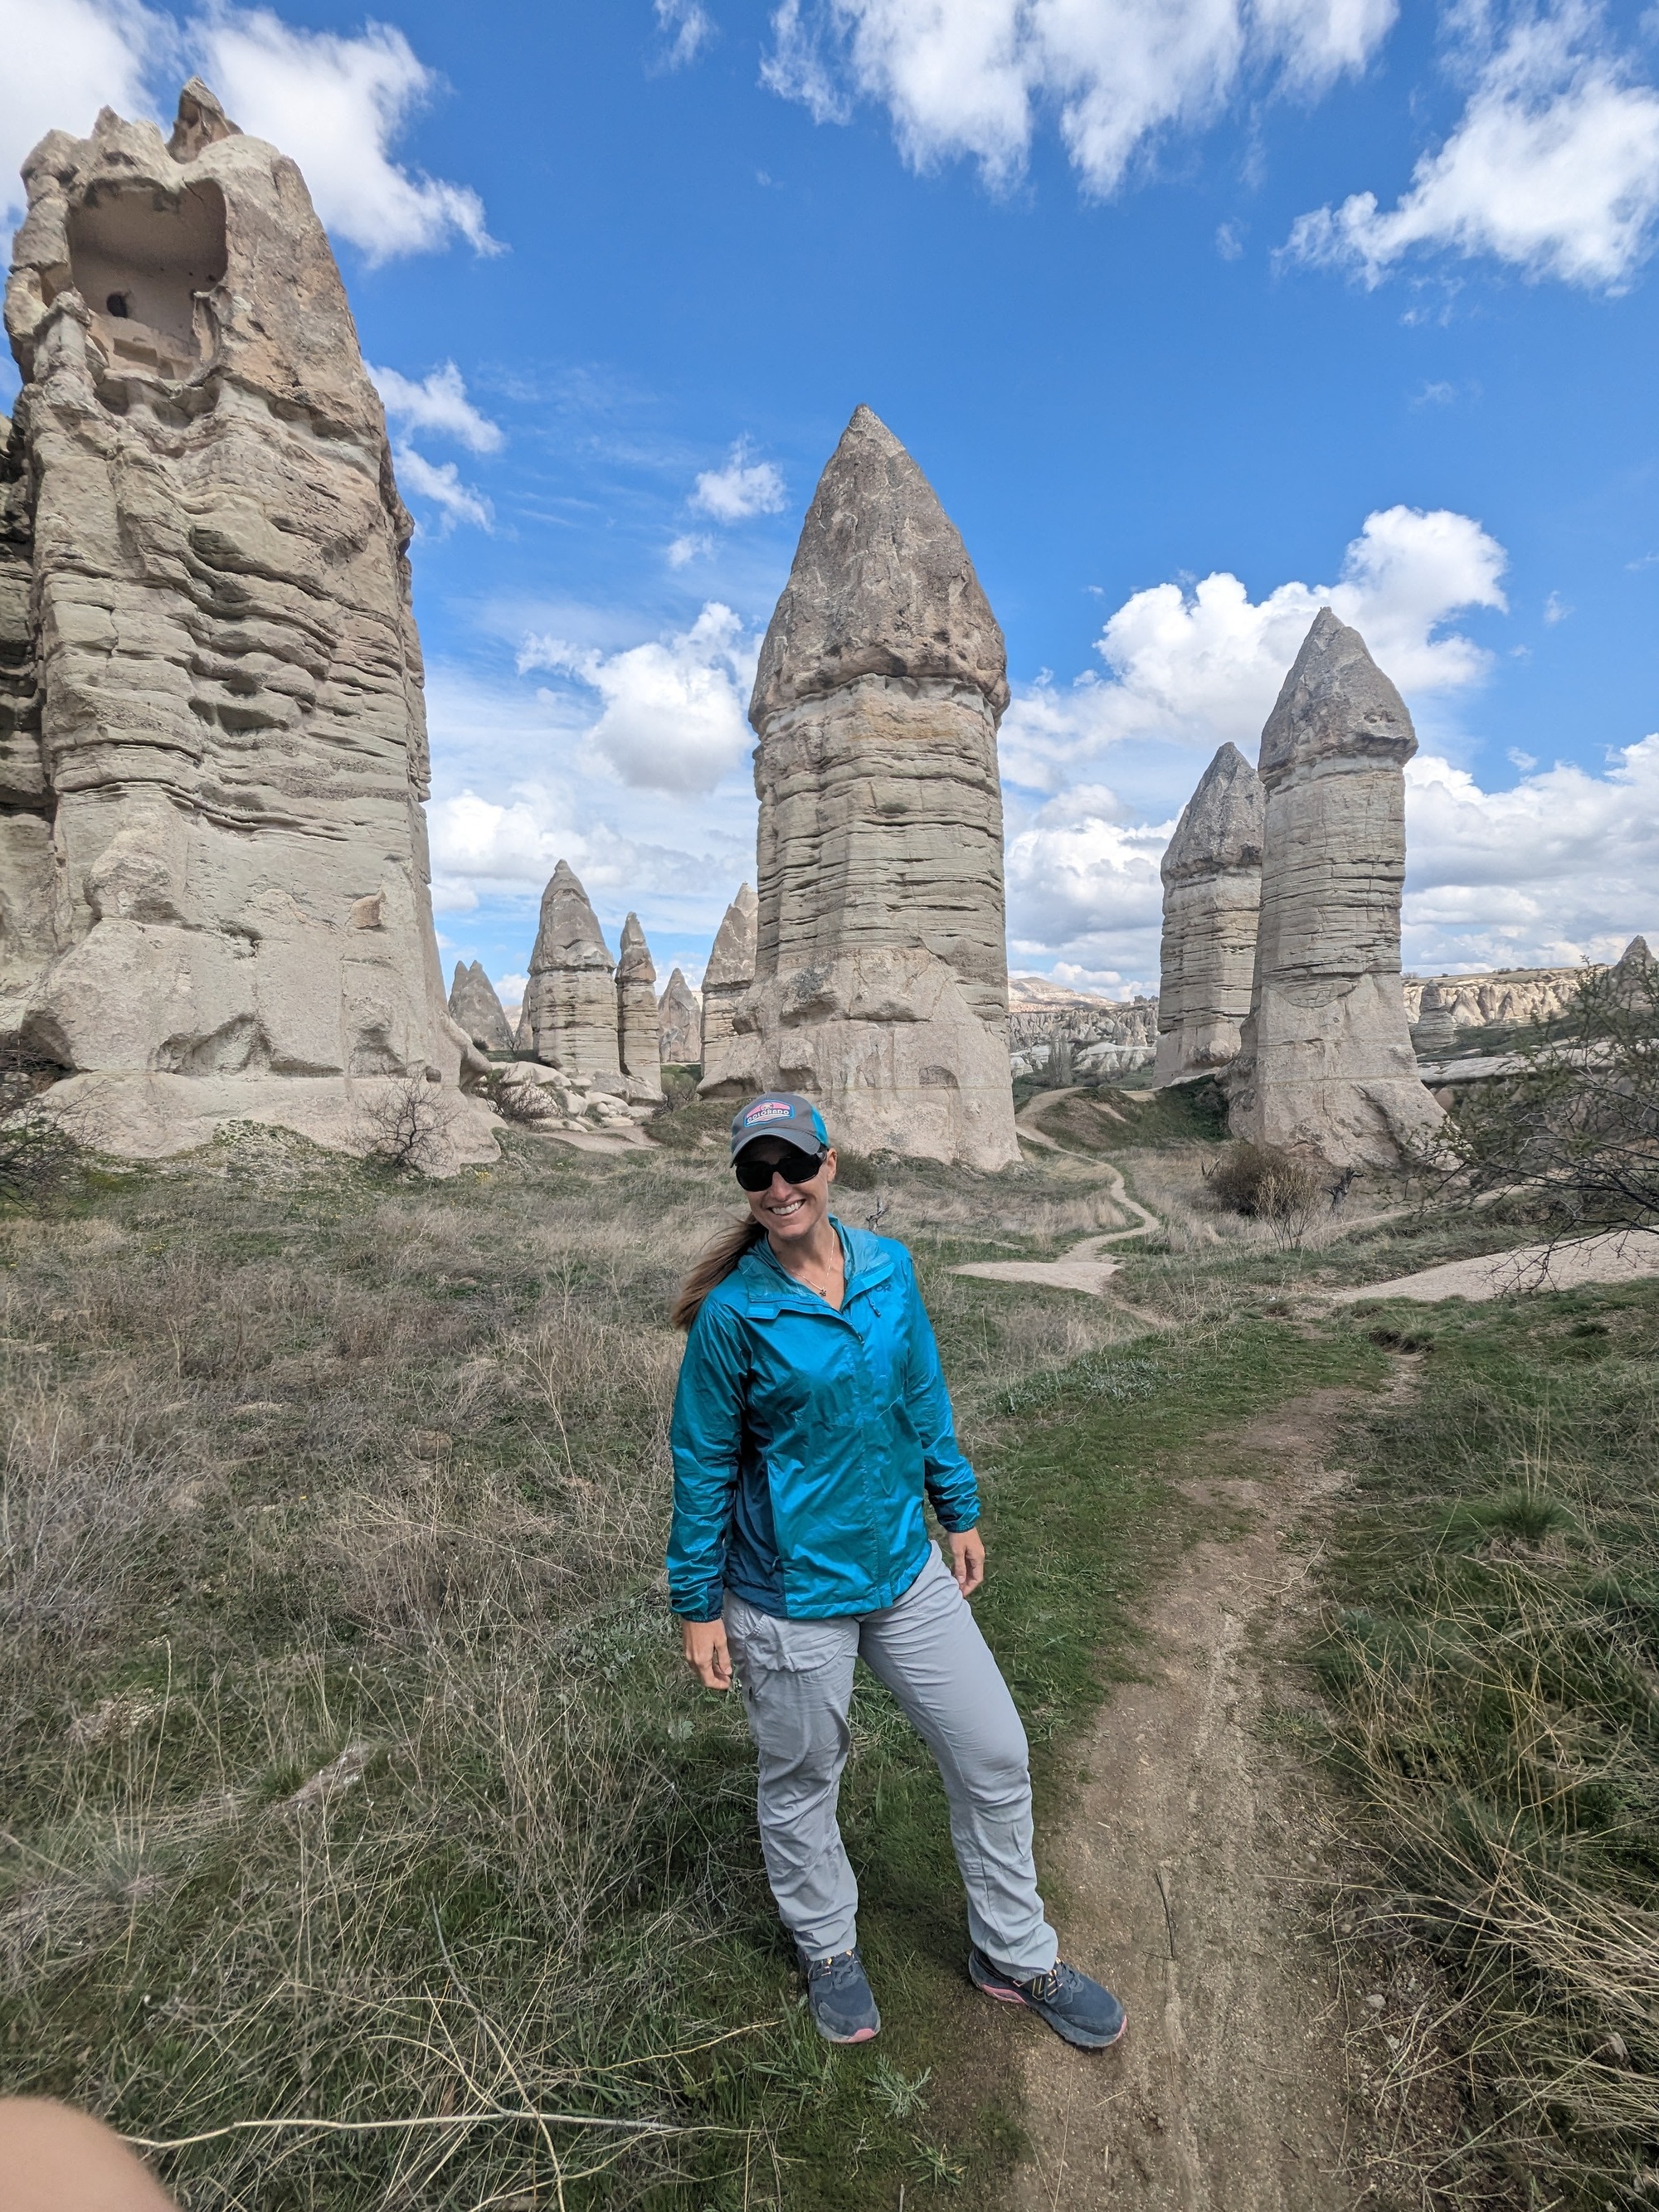 Randi standing by stone pillars known in the Cappadocia